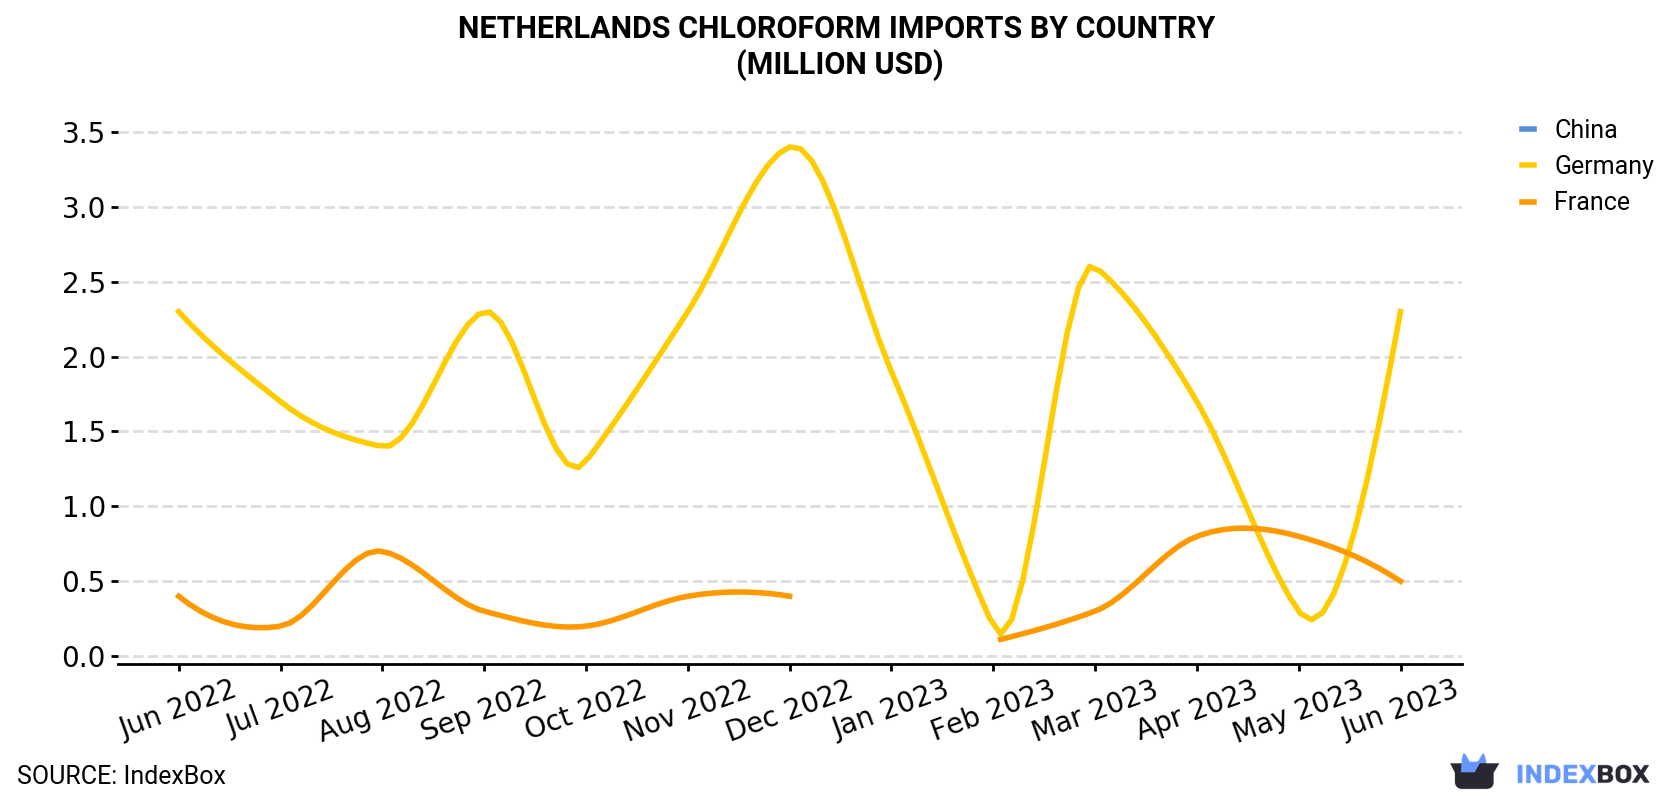 Netherlands Chloroform Imports By Country (Million USD)